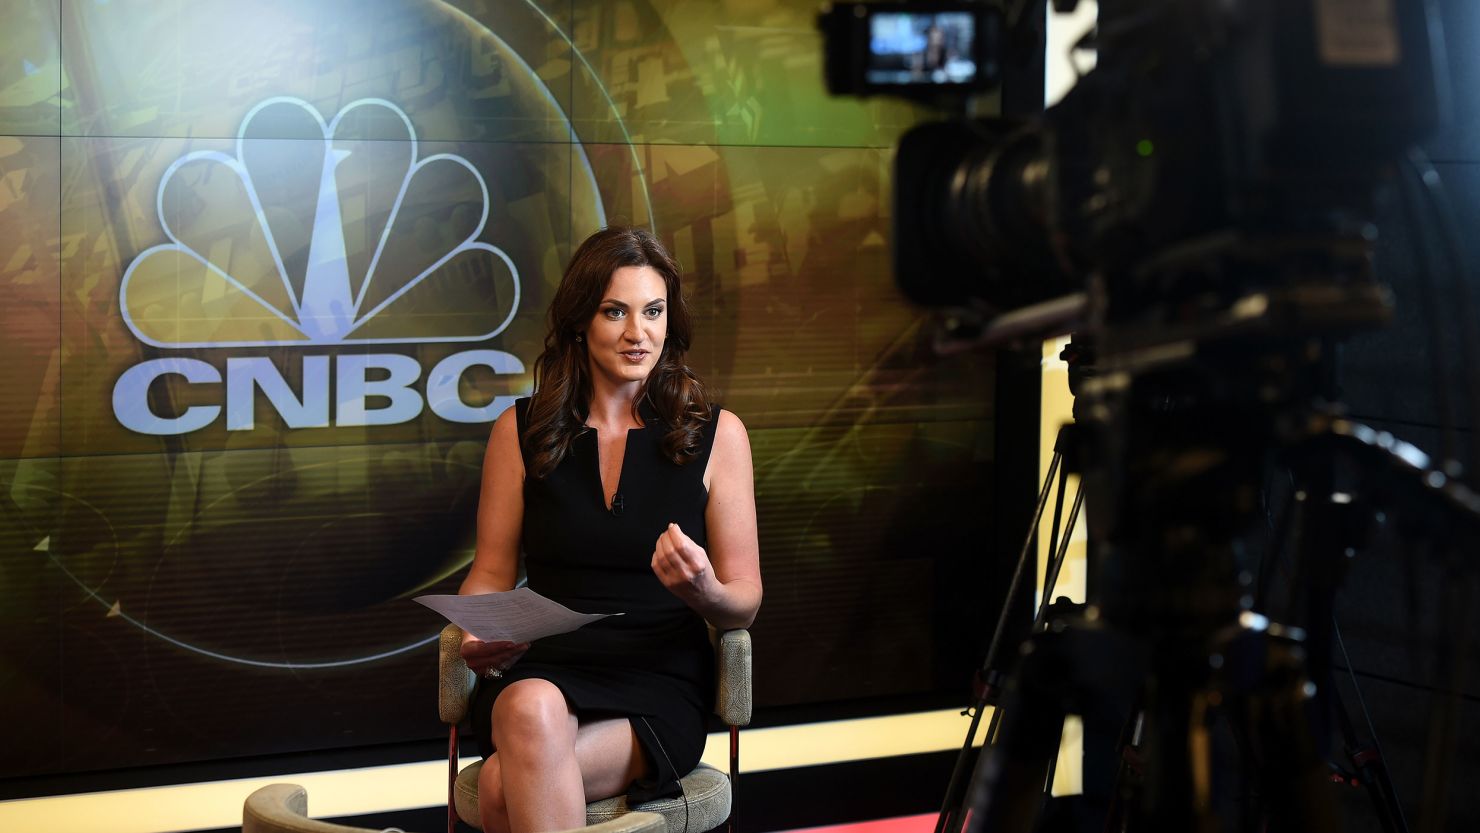 ABU DHABI, UNITED ARAB EMIRATES - APRIL 15:  CNBC's Middle East anchor Hadley Gamble at the new Middle East Headquarters Abu Dhabi Global Market on April 15, 2018 in Abu Dhabi, United Arab Emirates.  